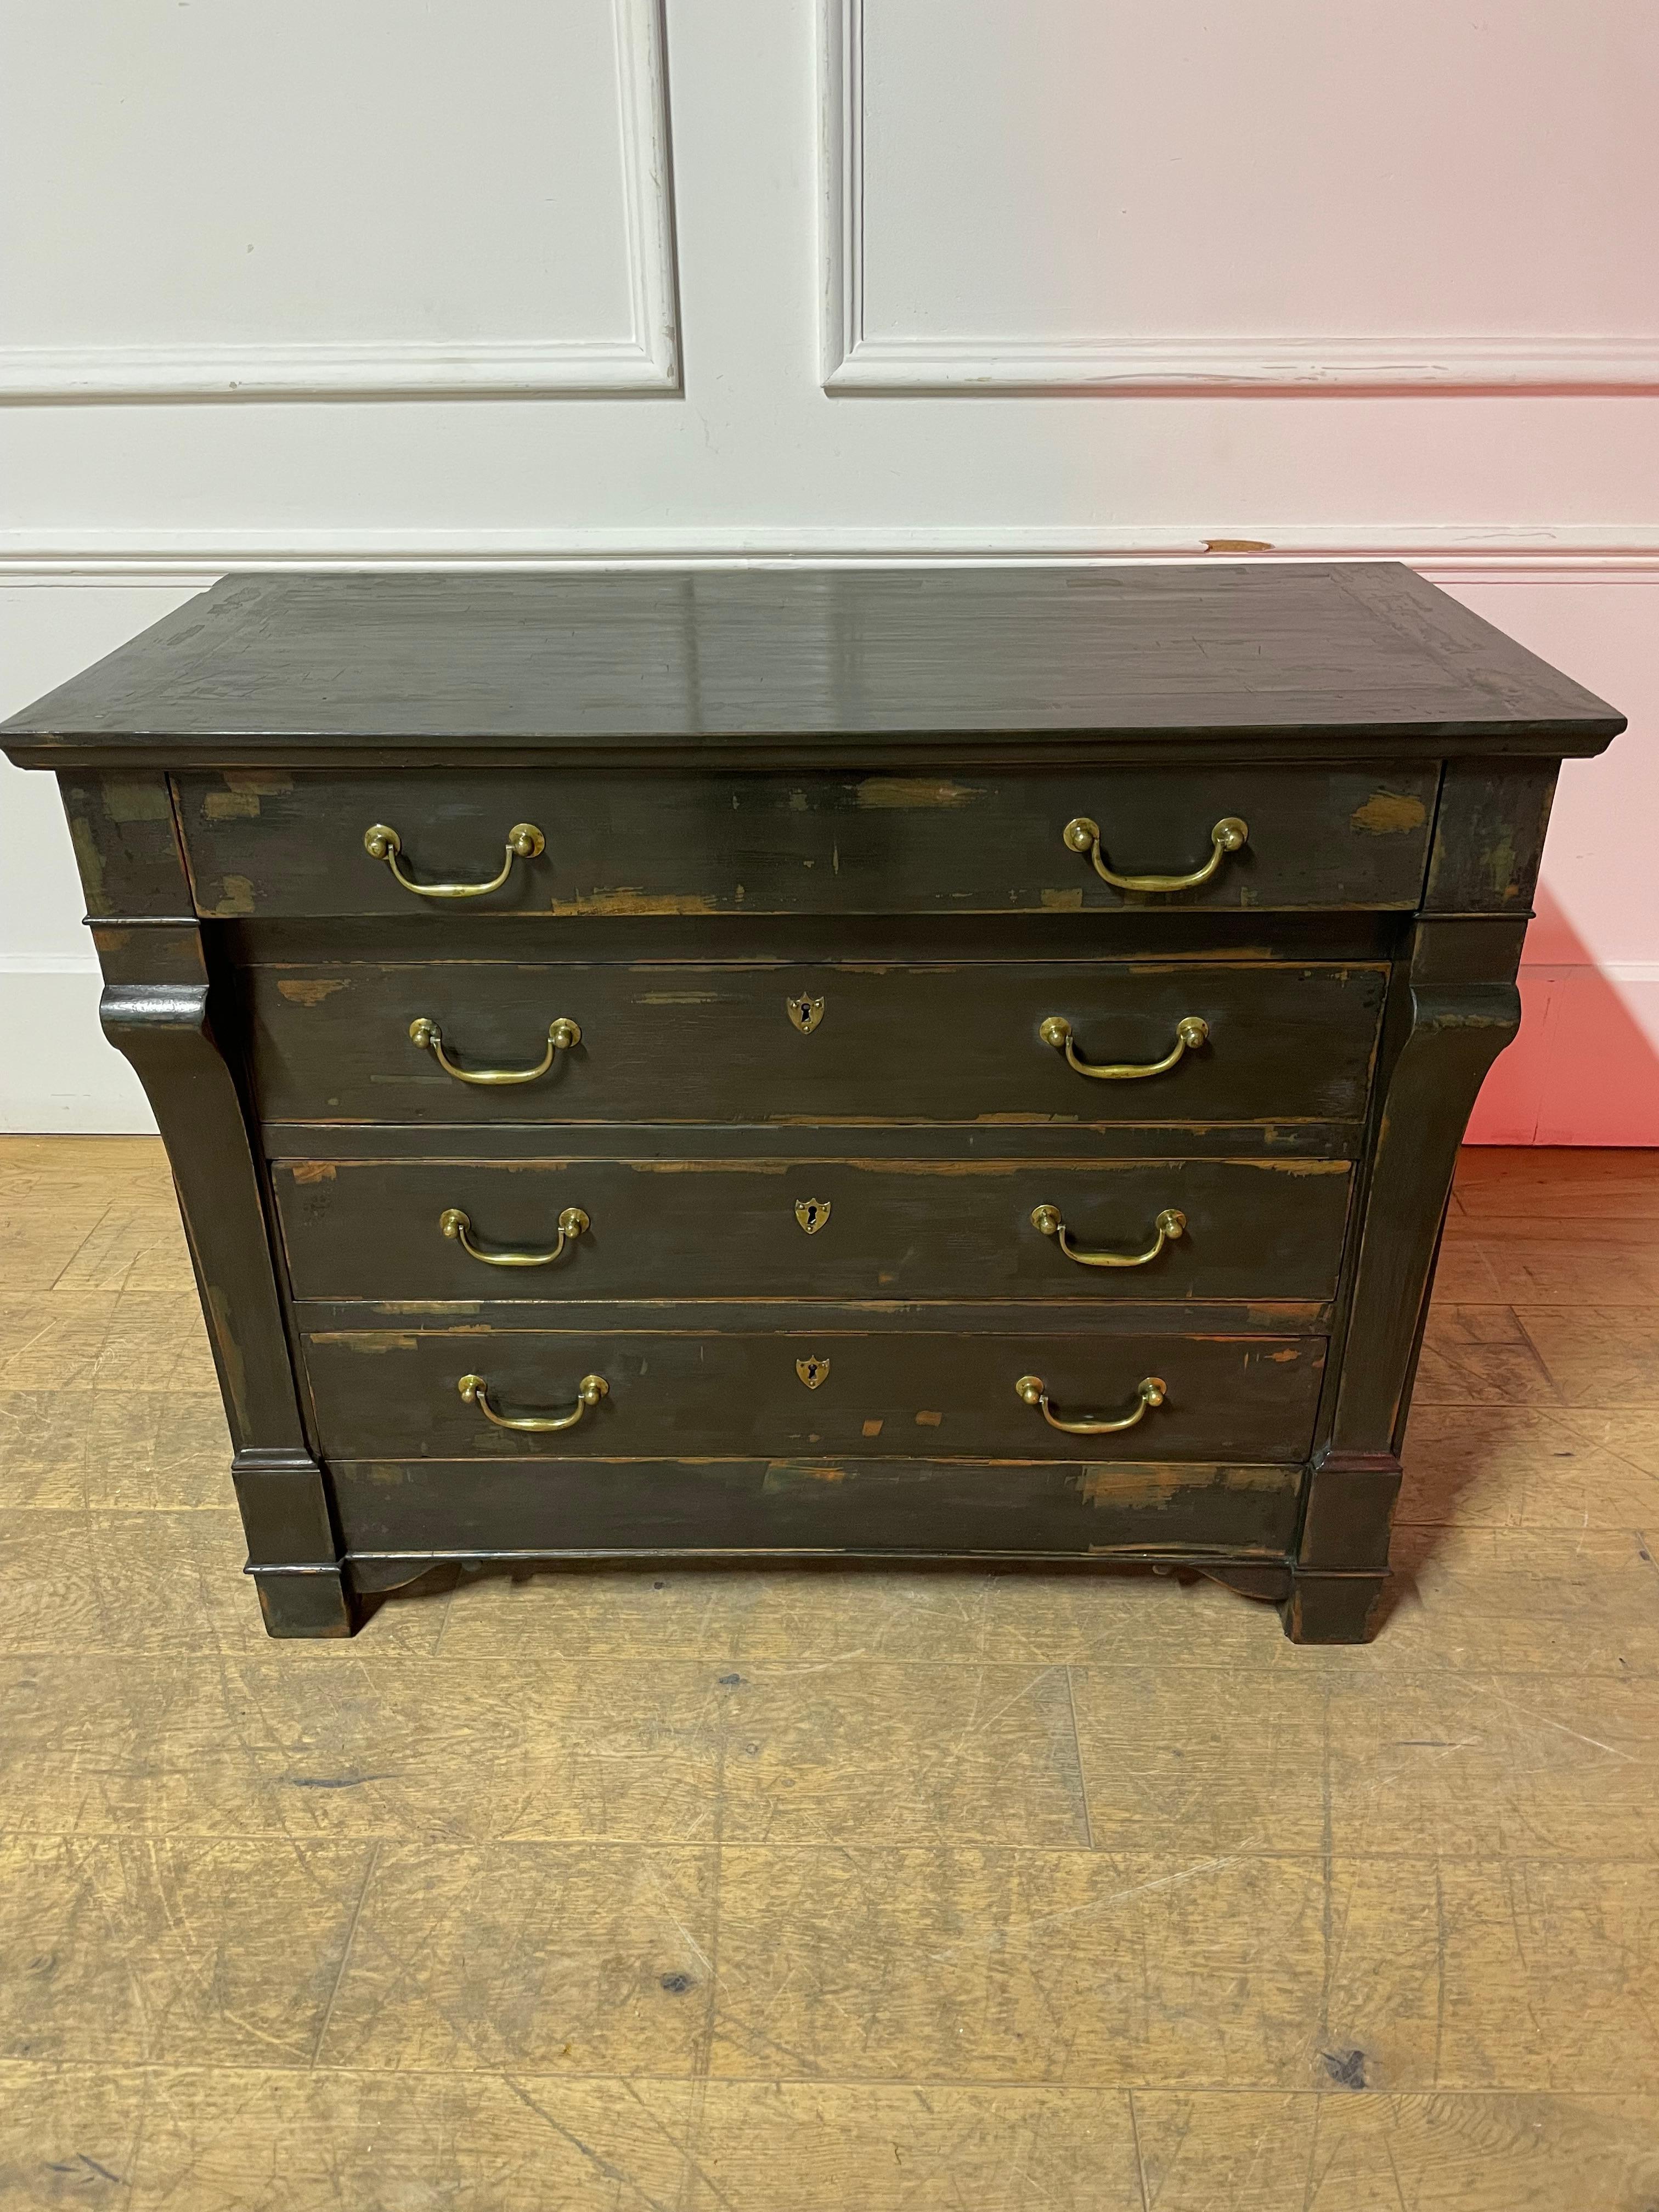 Early 19th century painted walnut small commode/chest of drawers.
French Circa 1820’s.With lovely brass handles and a dark distressed paint finish.
Height 32.5 inches or 82.5 cms
Width 39.5 inches or 100 cms
Depth 18.5 inches or 47 cms